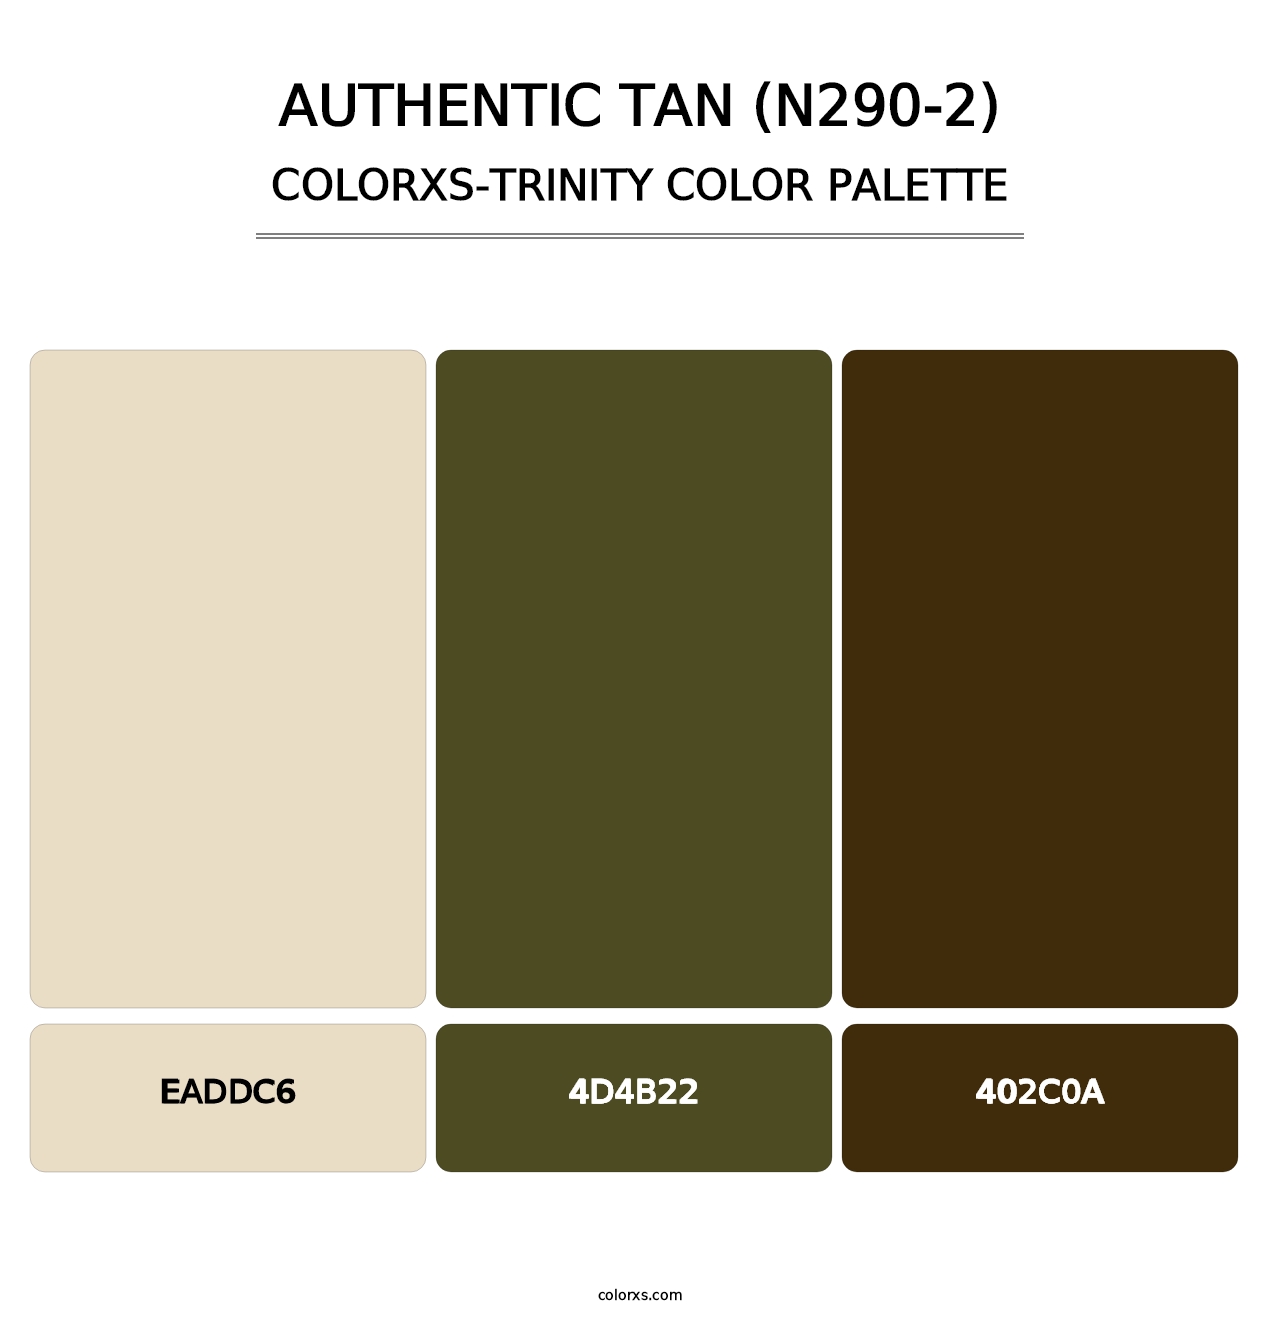 Authentic Tan (N290-2) - Colorxs Trinity Palette